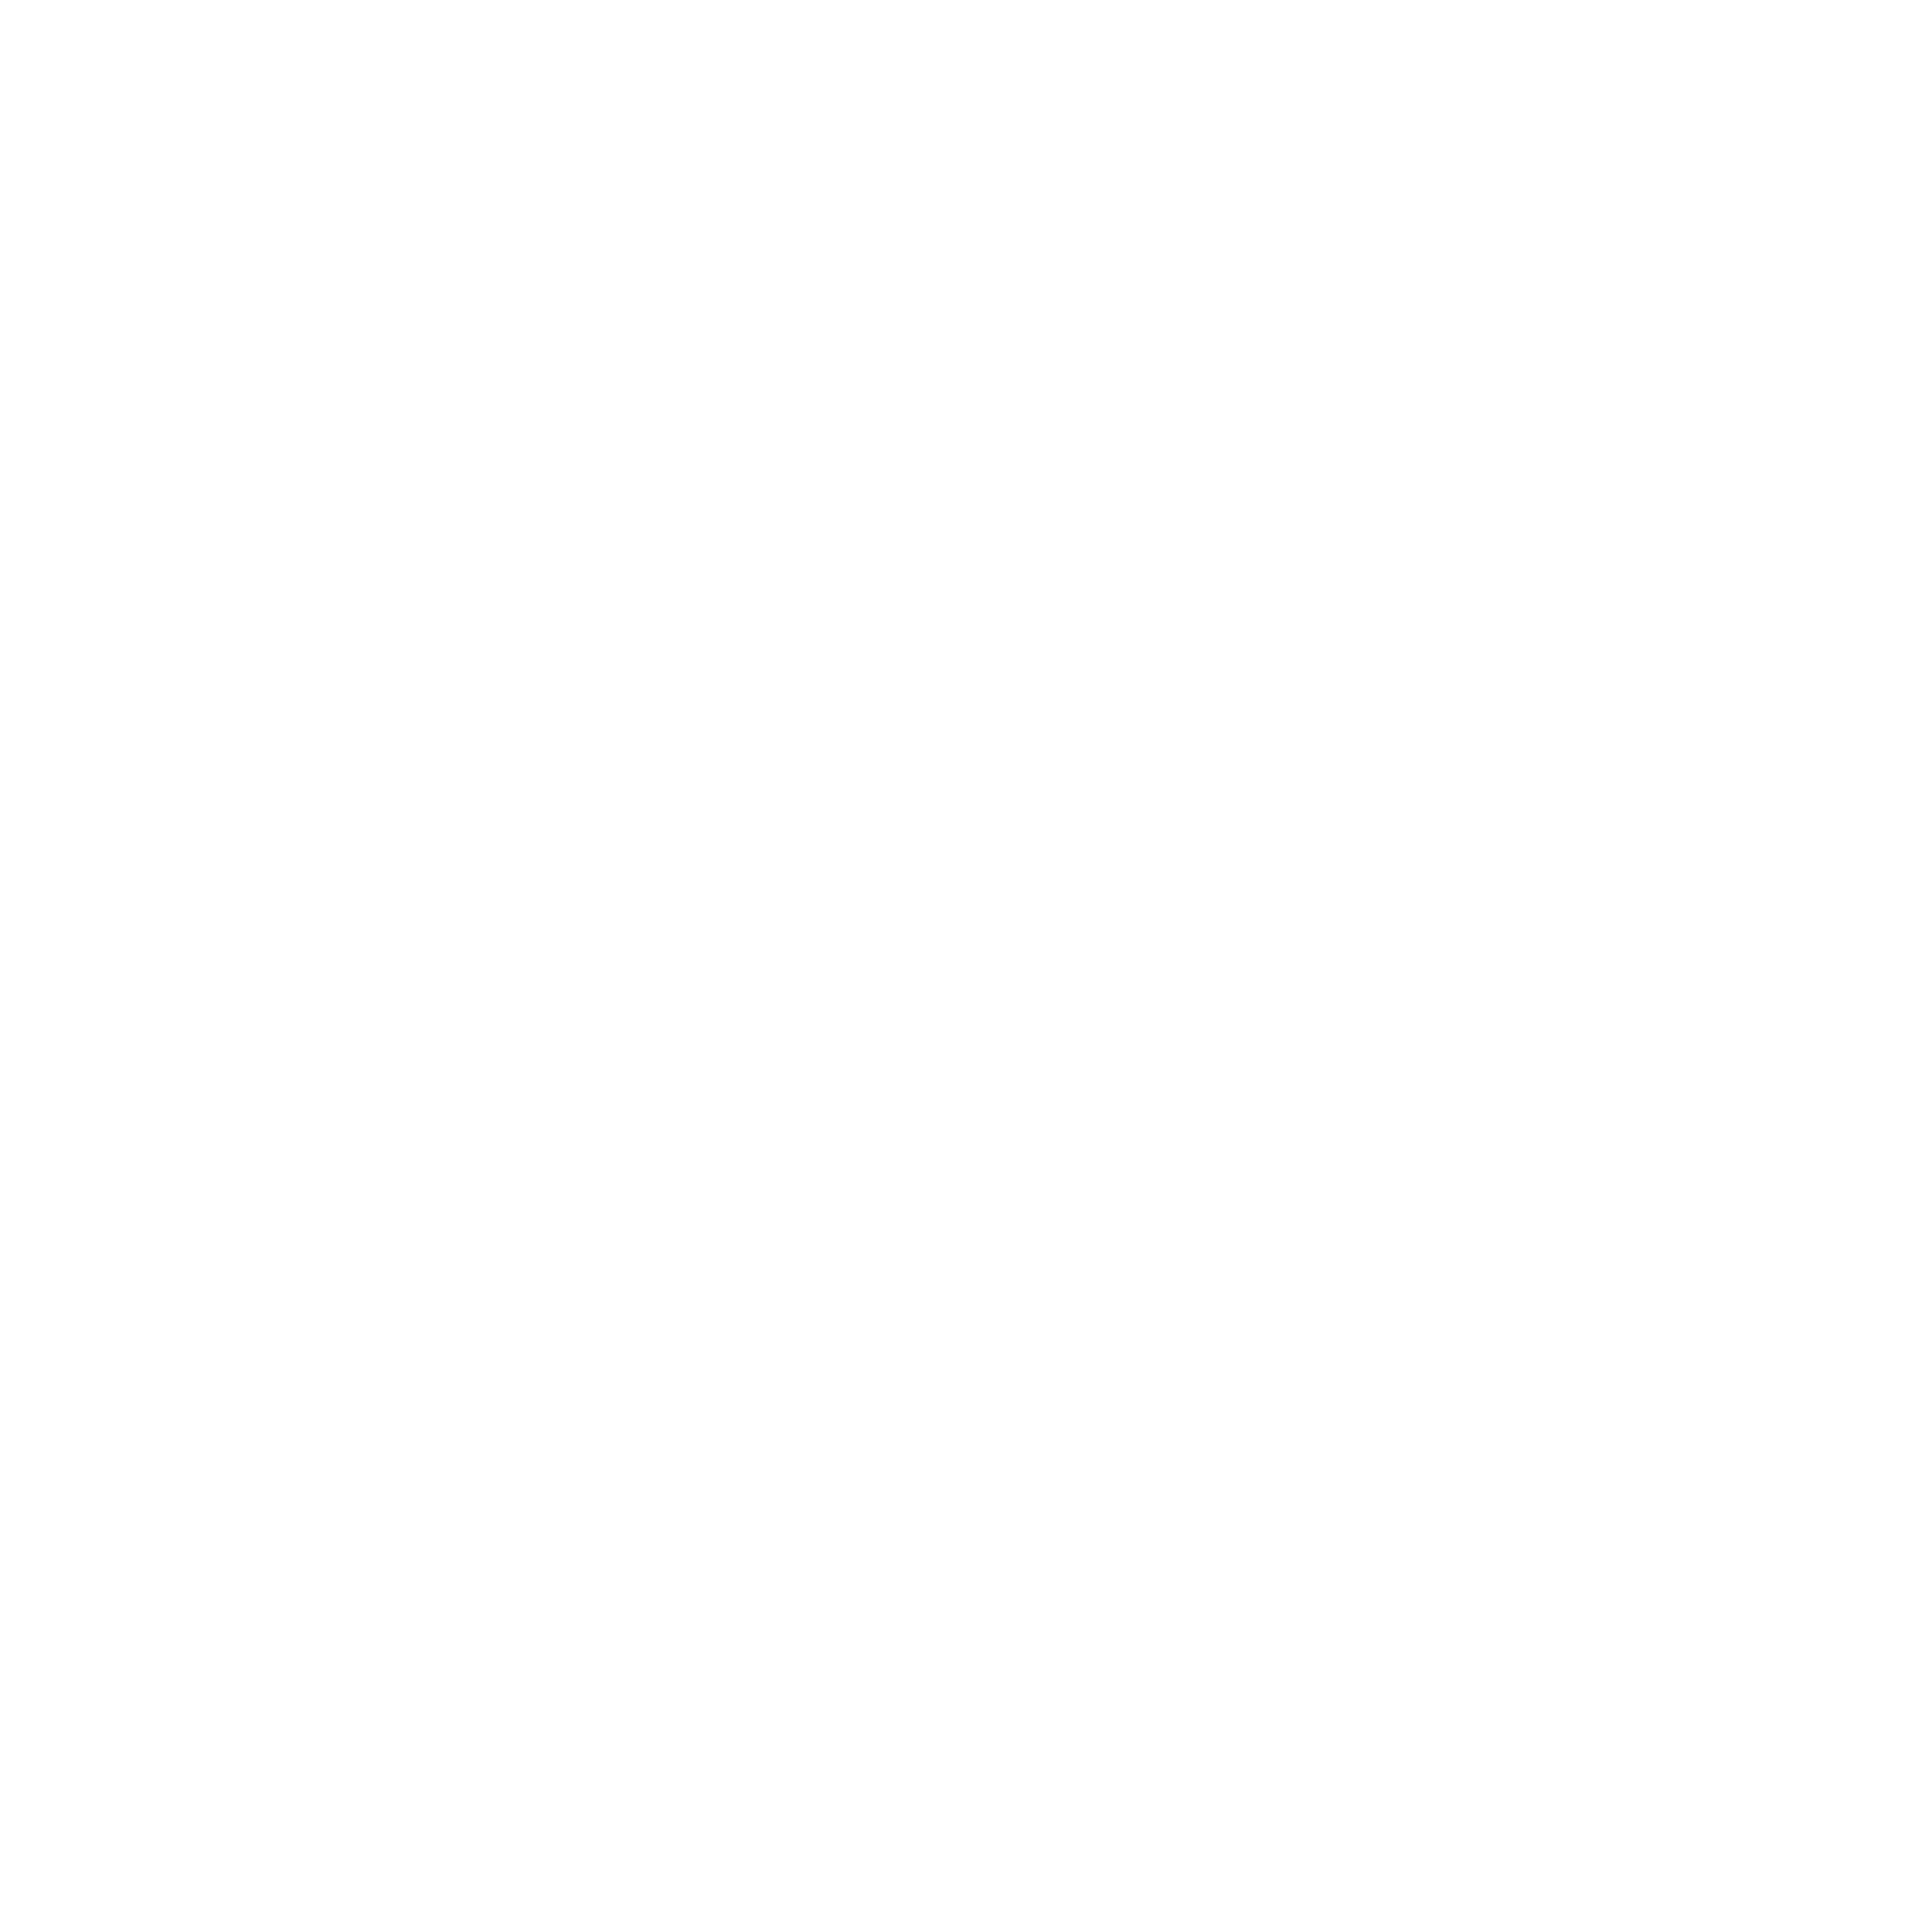 icon link to instagram page